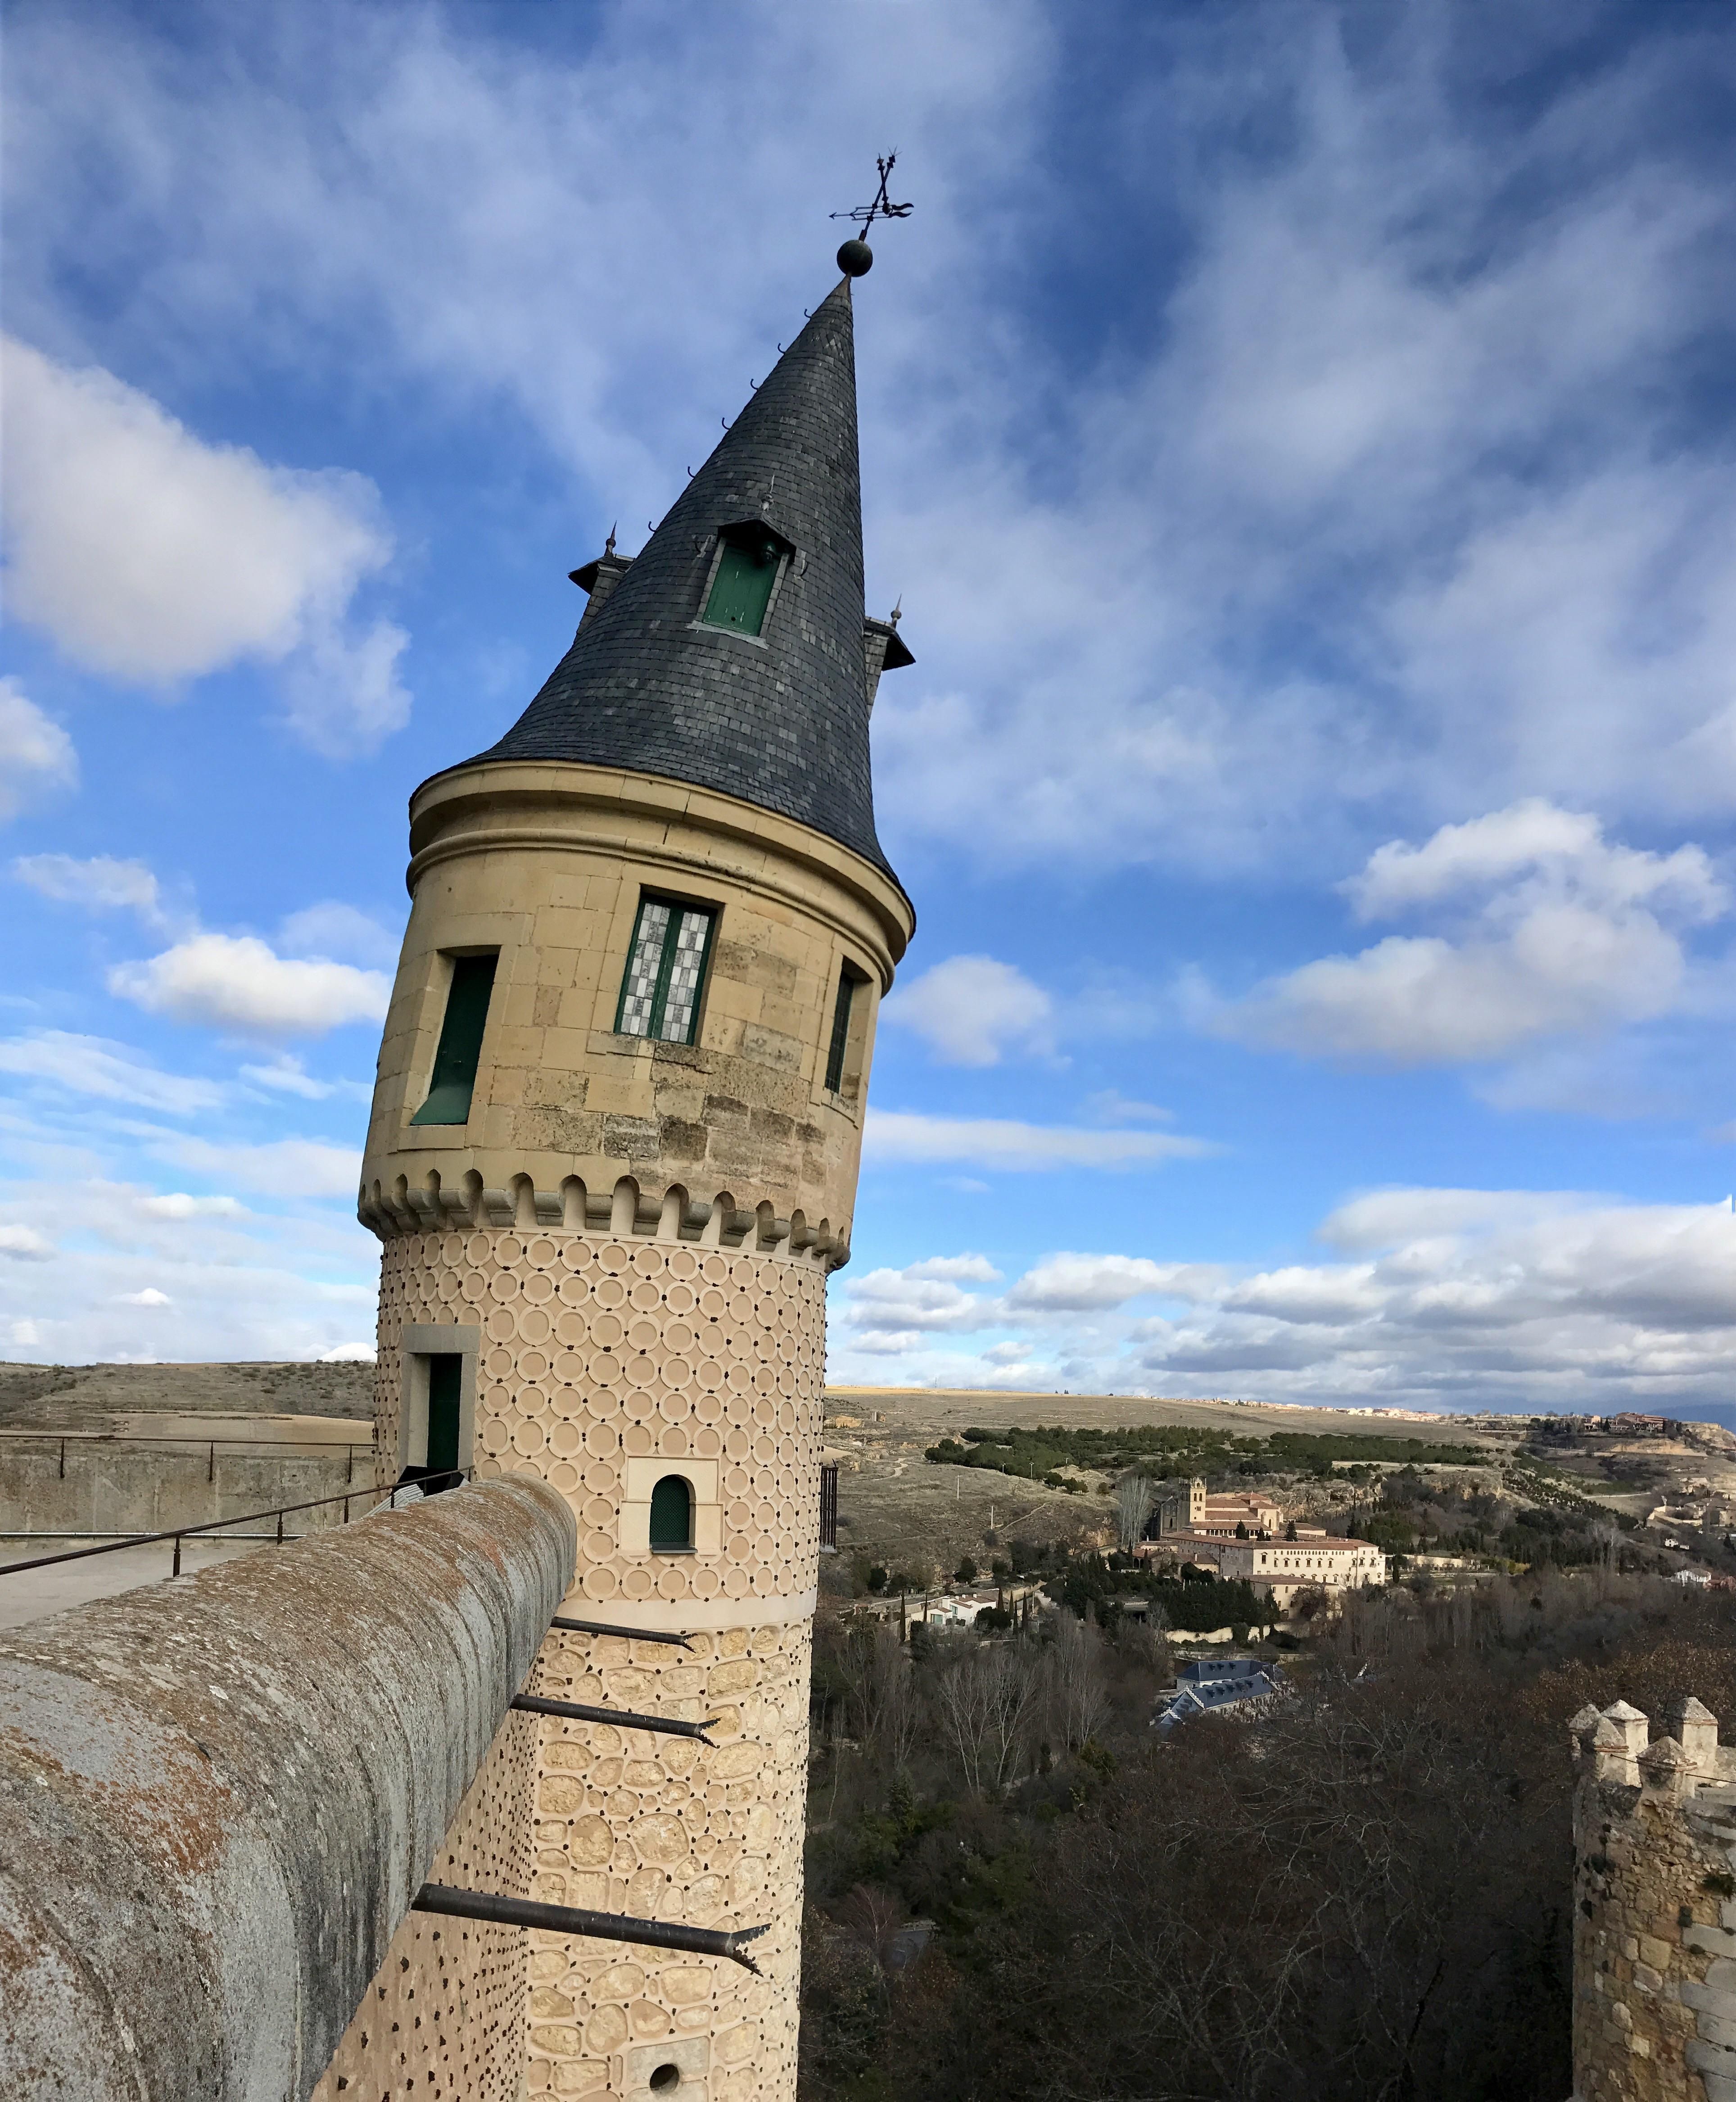 Panoramic camera caused this castle tower too seem like its leaning ...